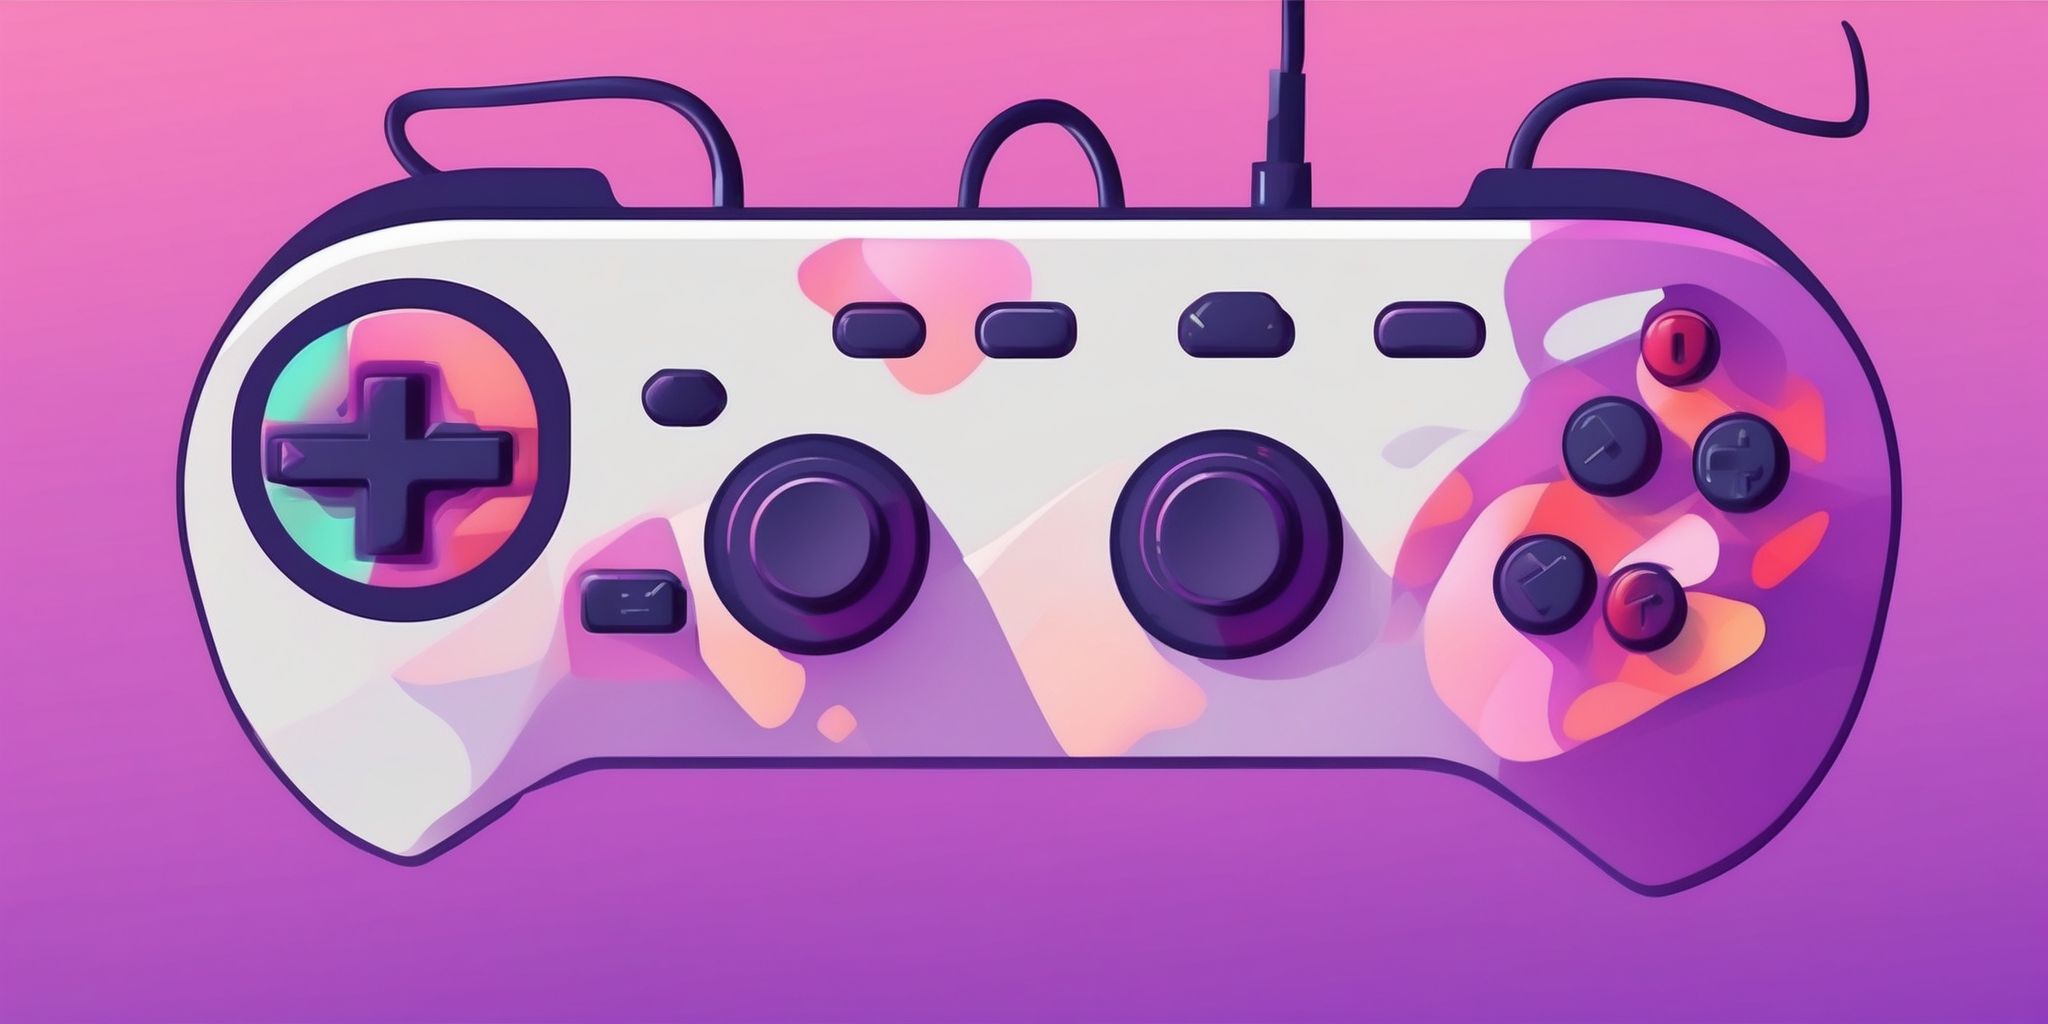 Game controller in flat illustration style, colorful purple gradient colors